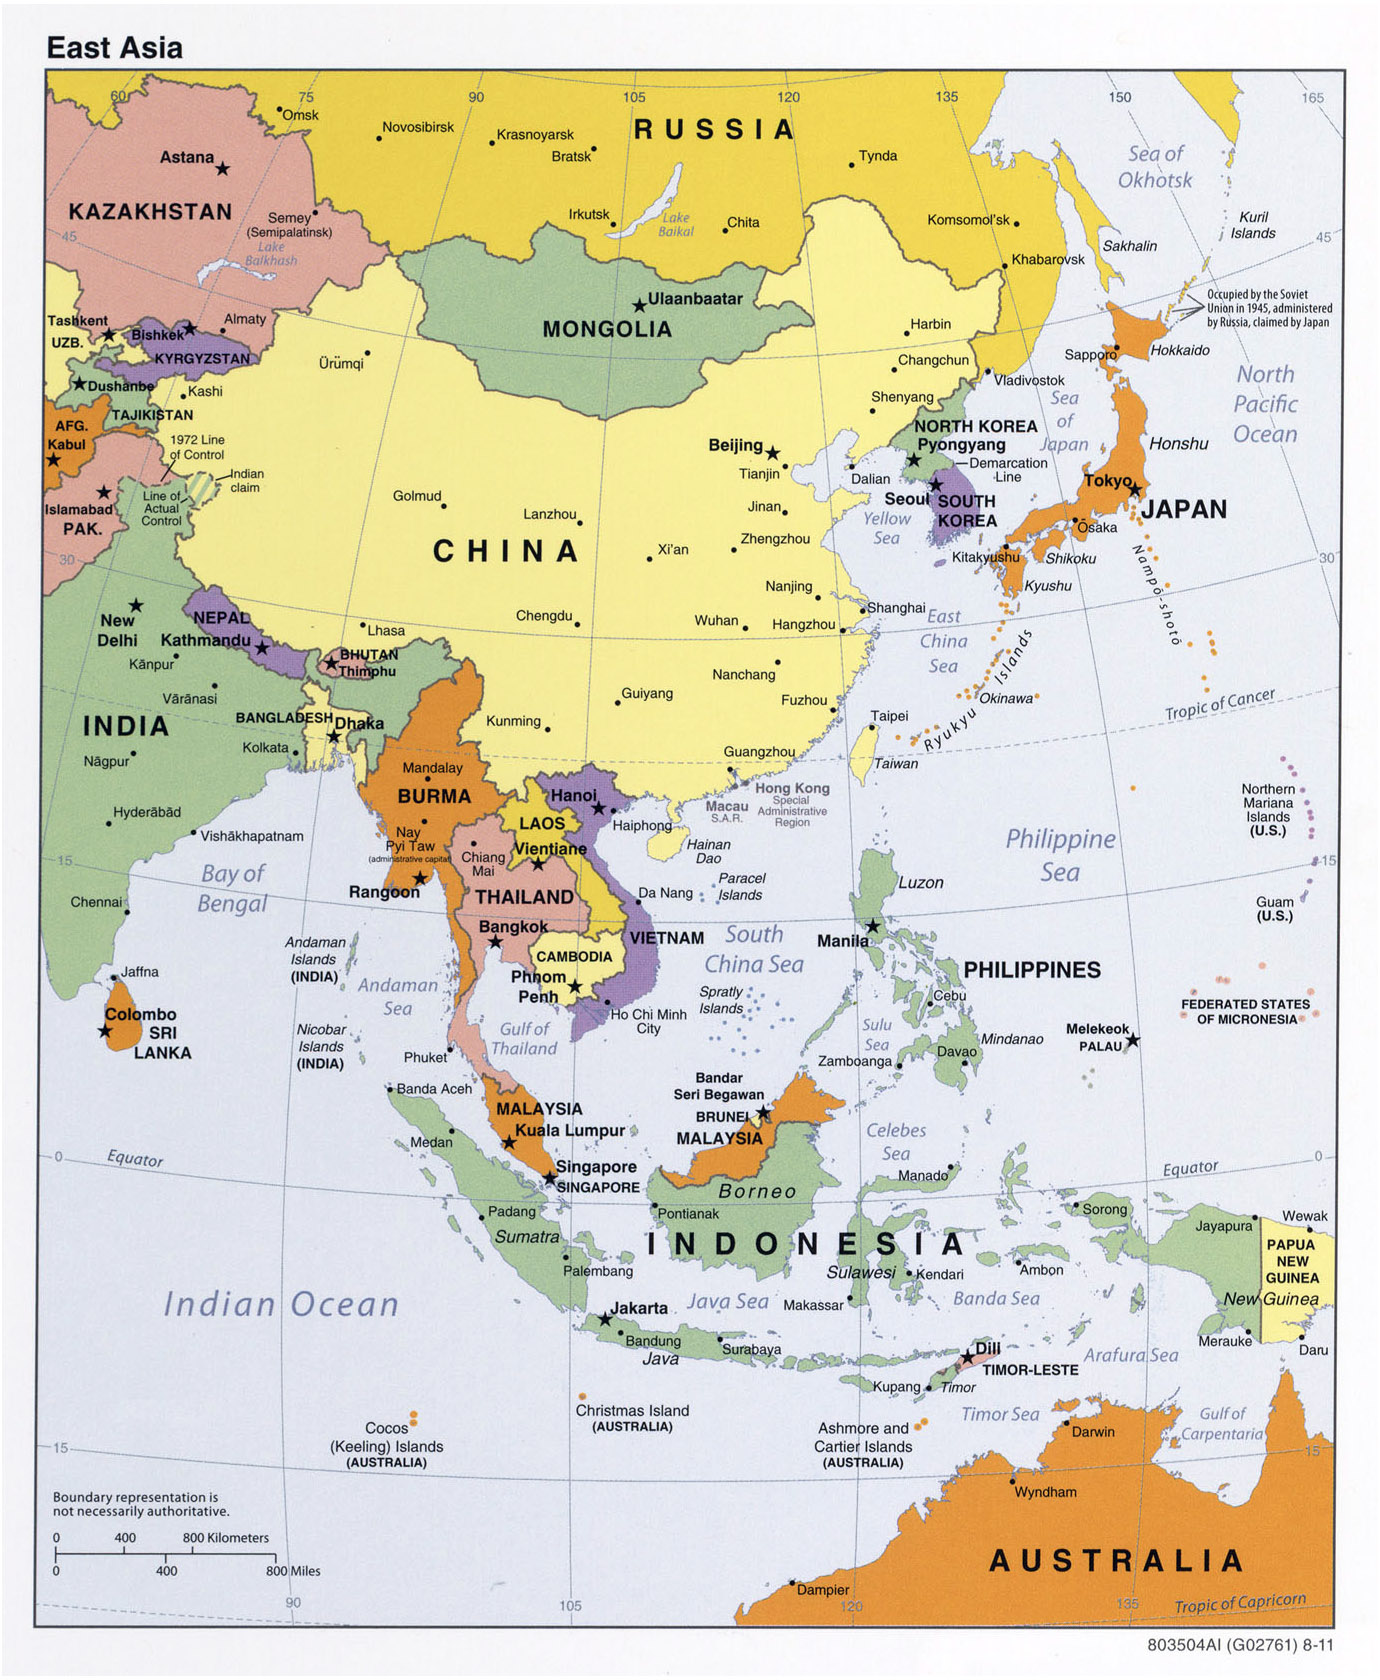 large-detailed-political-map-of-east-asia-east-asia-large-detailed